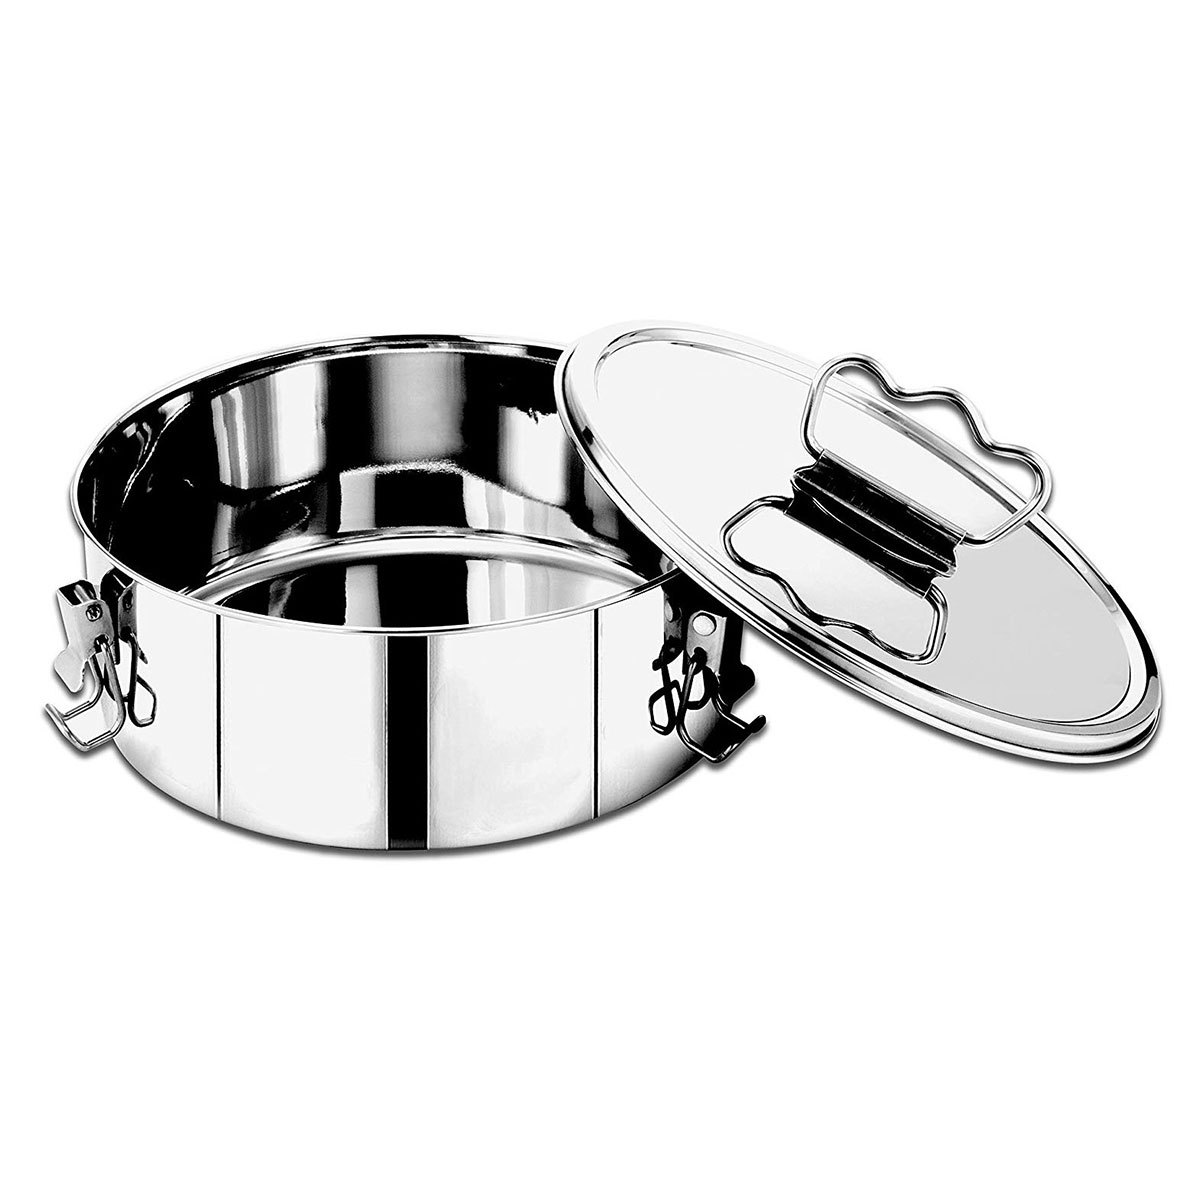 Jetcloudlive Stainless Steel Flan Mold with Lid,gonomic Handle for Easy  Lifting,Flanera Flan Maker for Chocolate Cake Cupcake Pudding Flaneras  Moldes